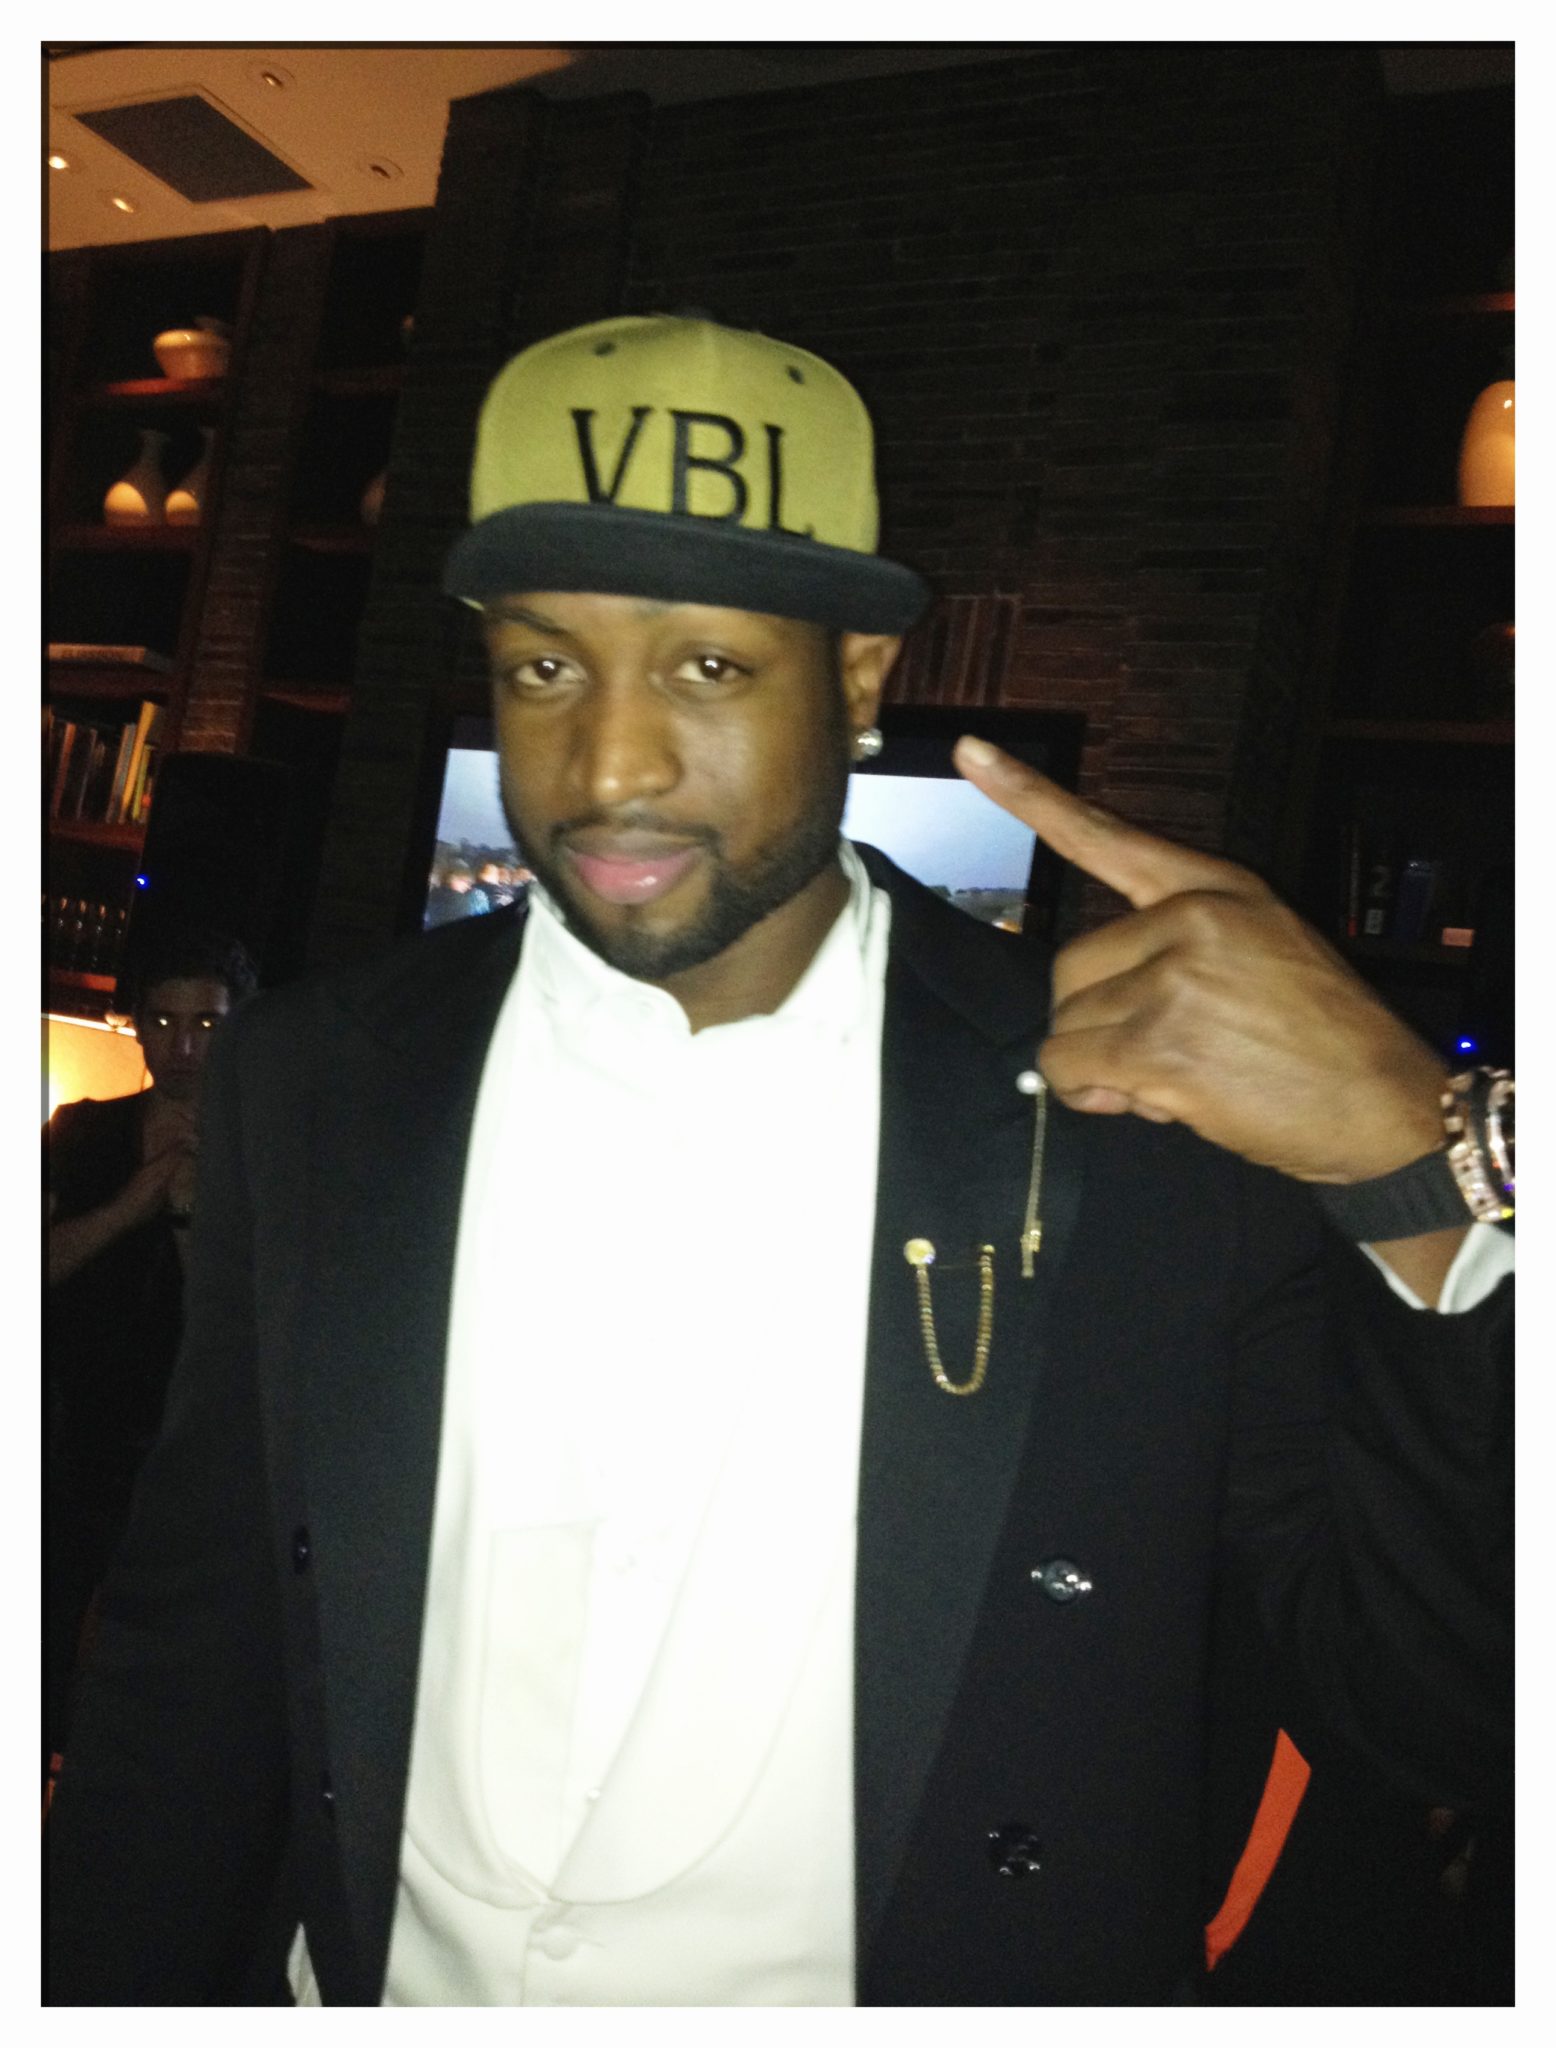 D Wade is down with VBL